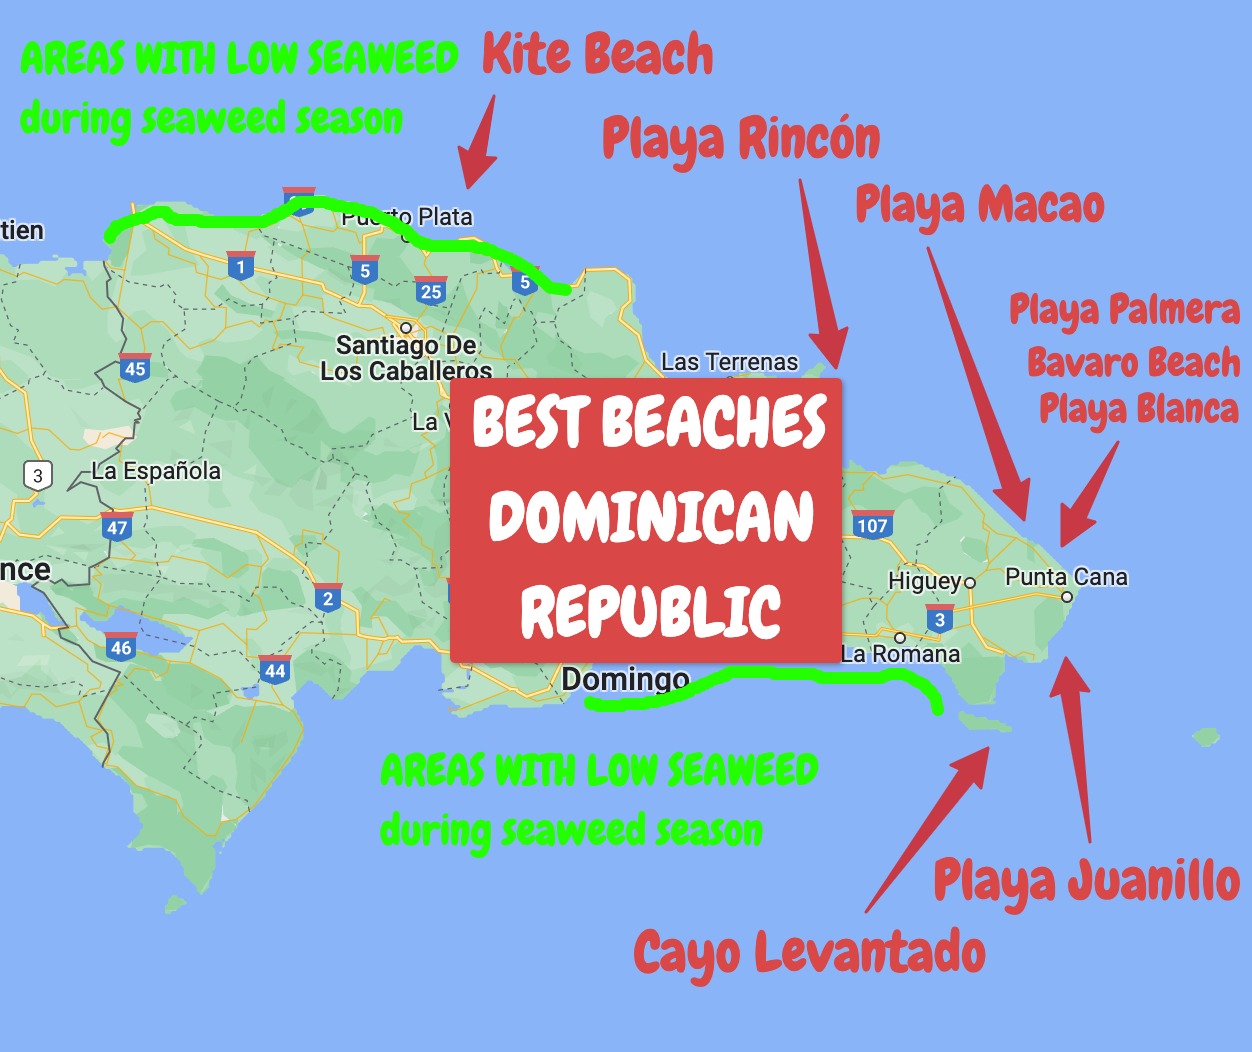 10 Best Beaches In Dominican Republic To Visit In 2022 (+Seaweed Info